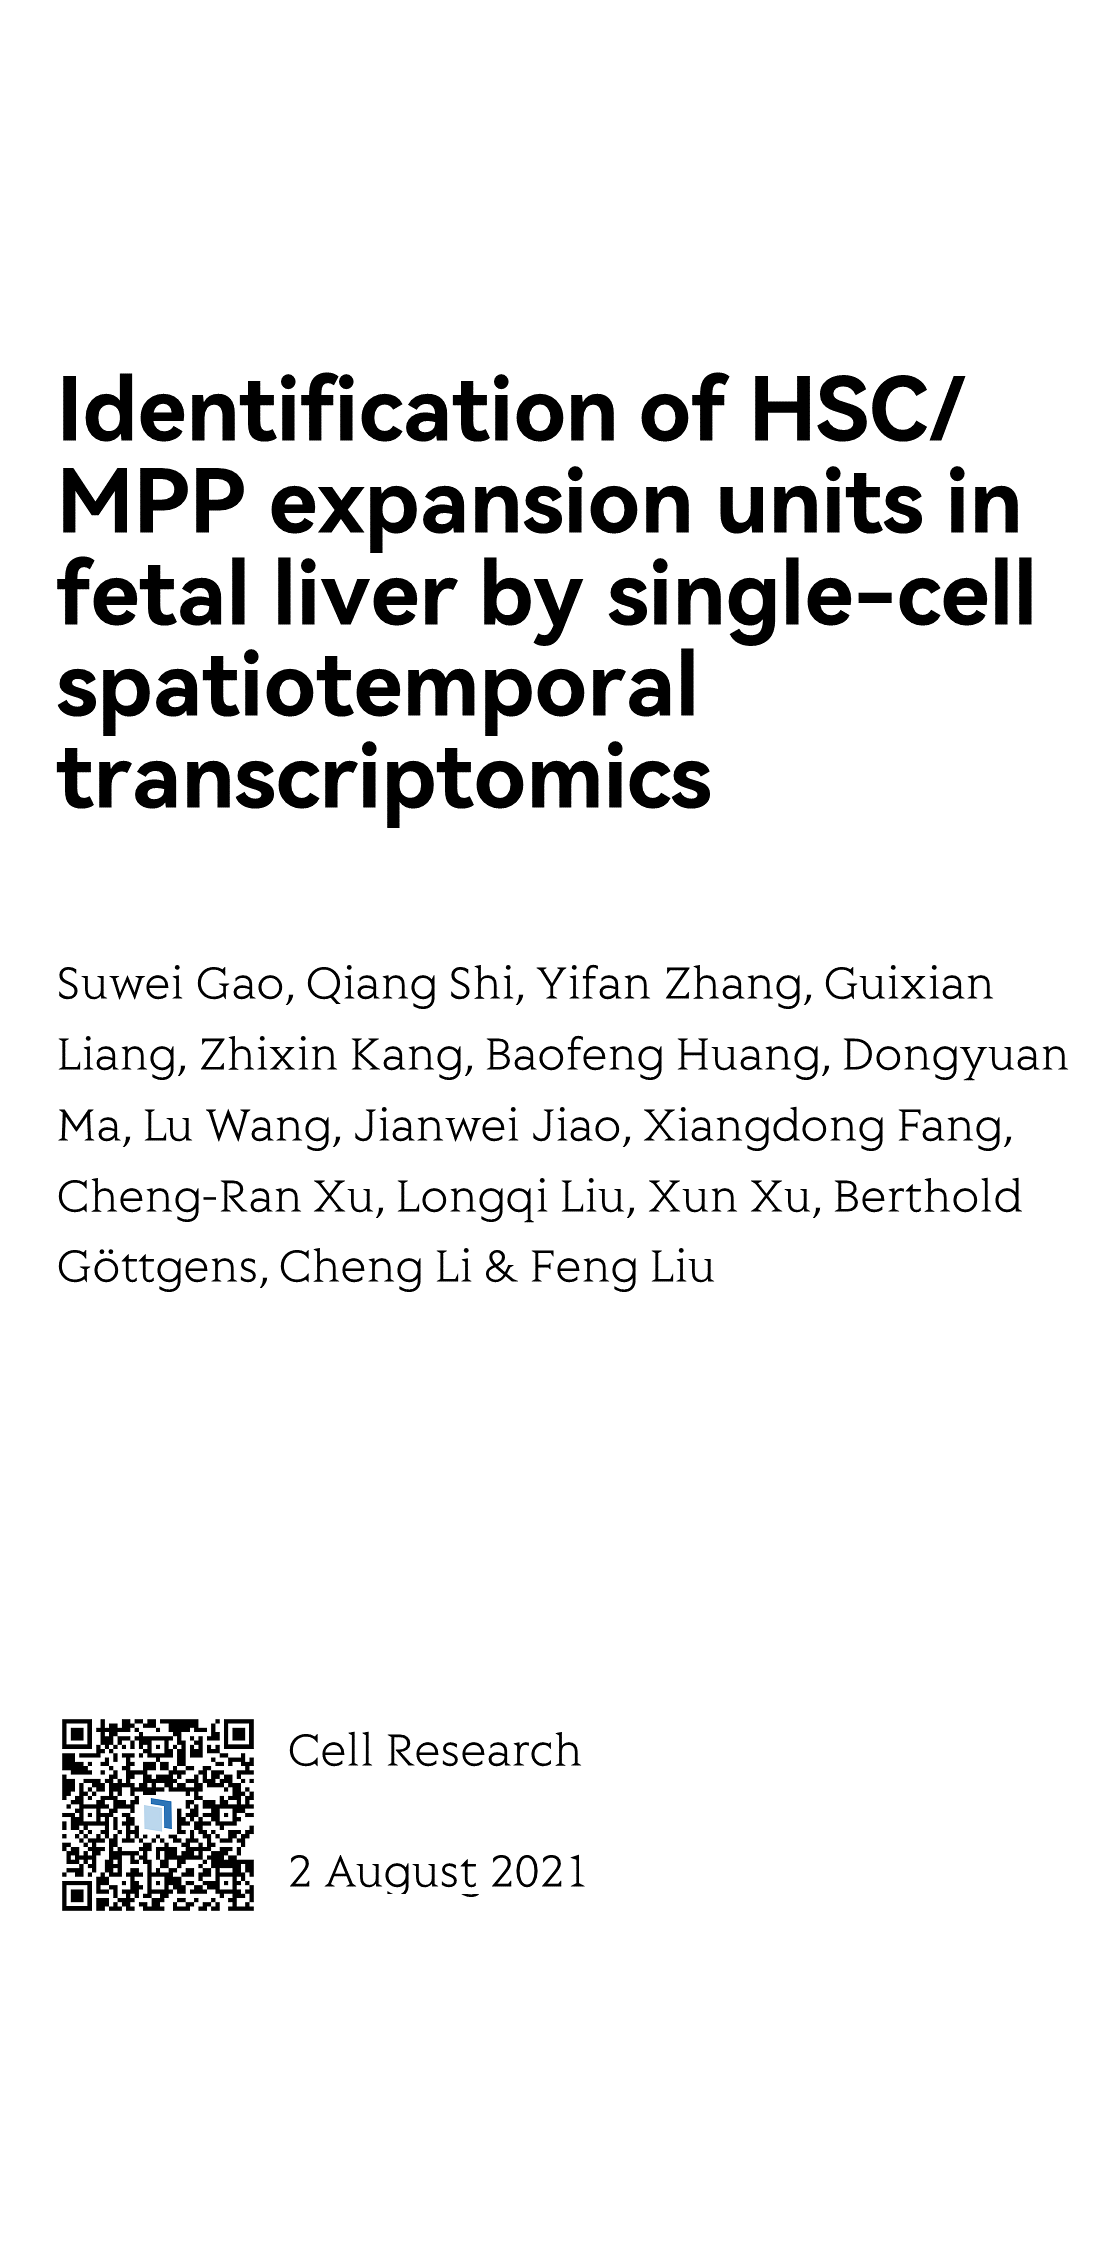 Identification of HSC/MPP expansion units in fetal liver by single-cell spatiotemporal transcriptomics_1